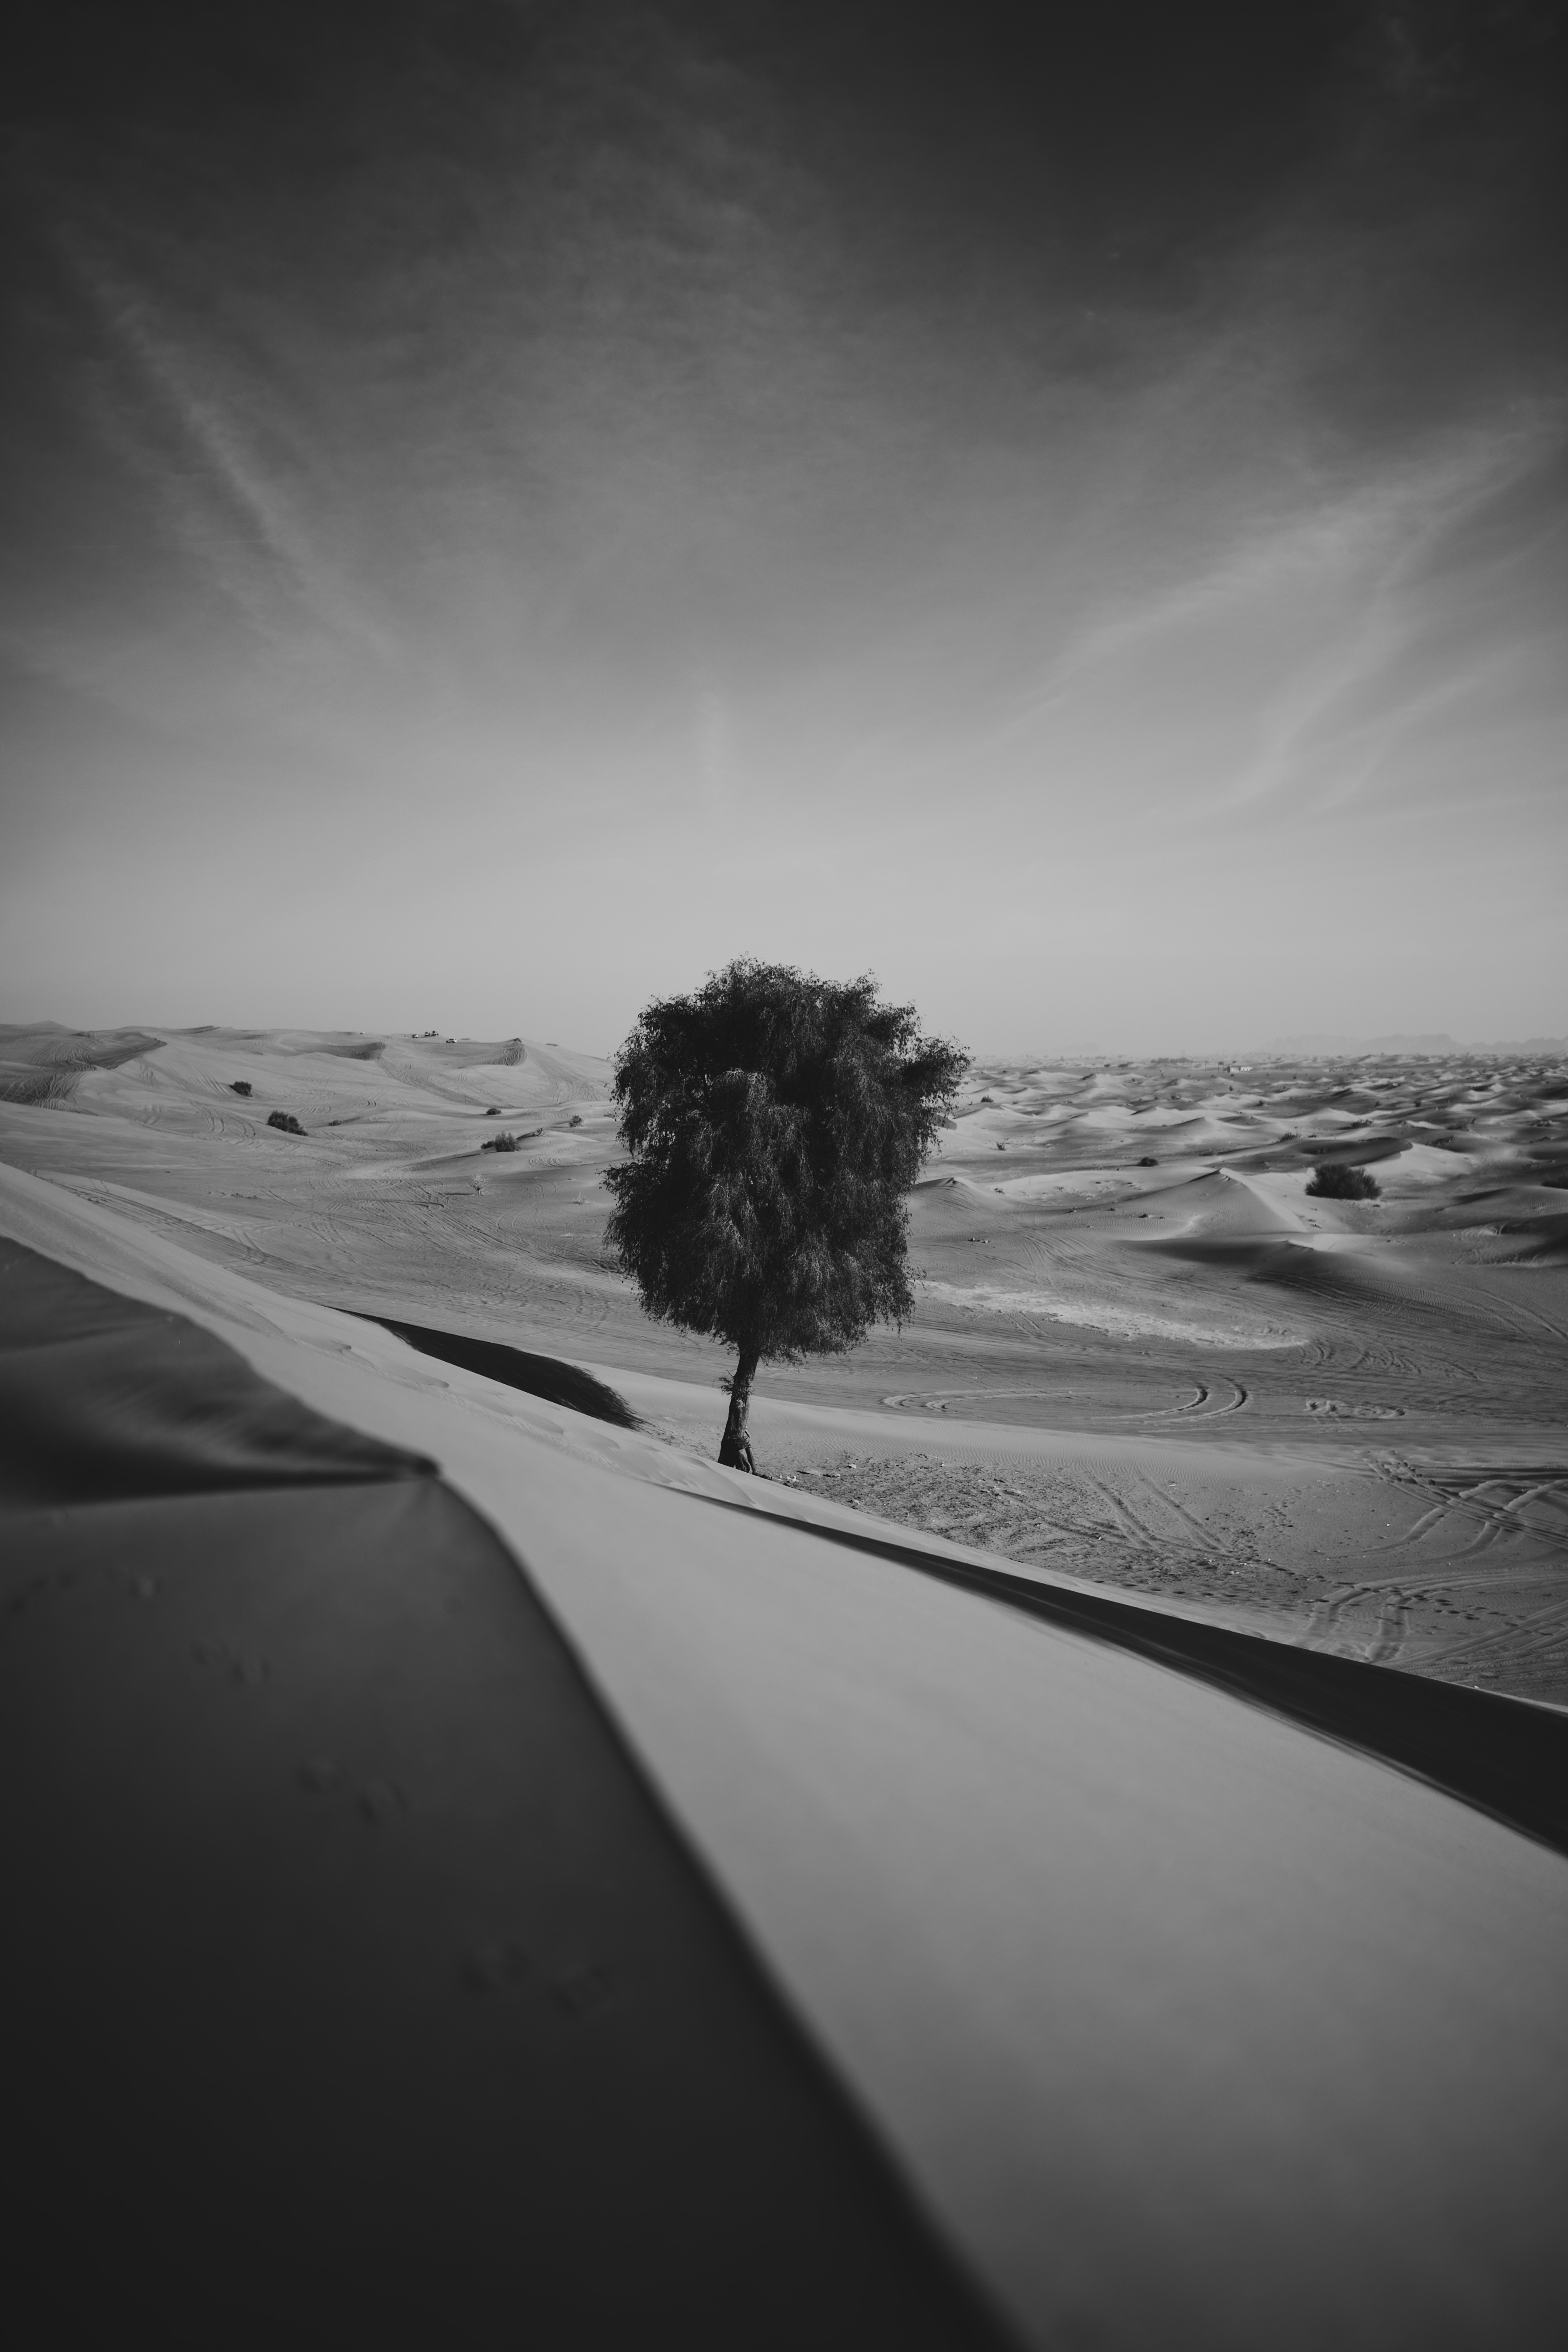 alone, dunes, lonely, nature, sand, desert, wood, tree, bw, chb, links cellphone